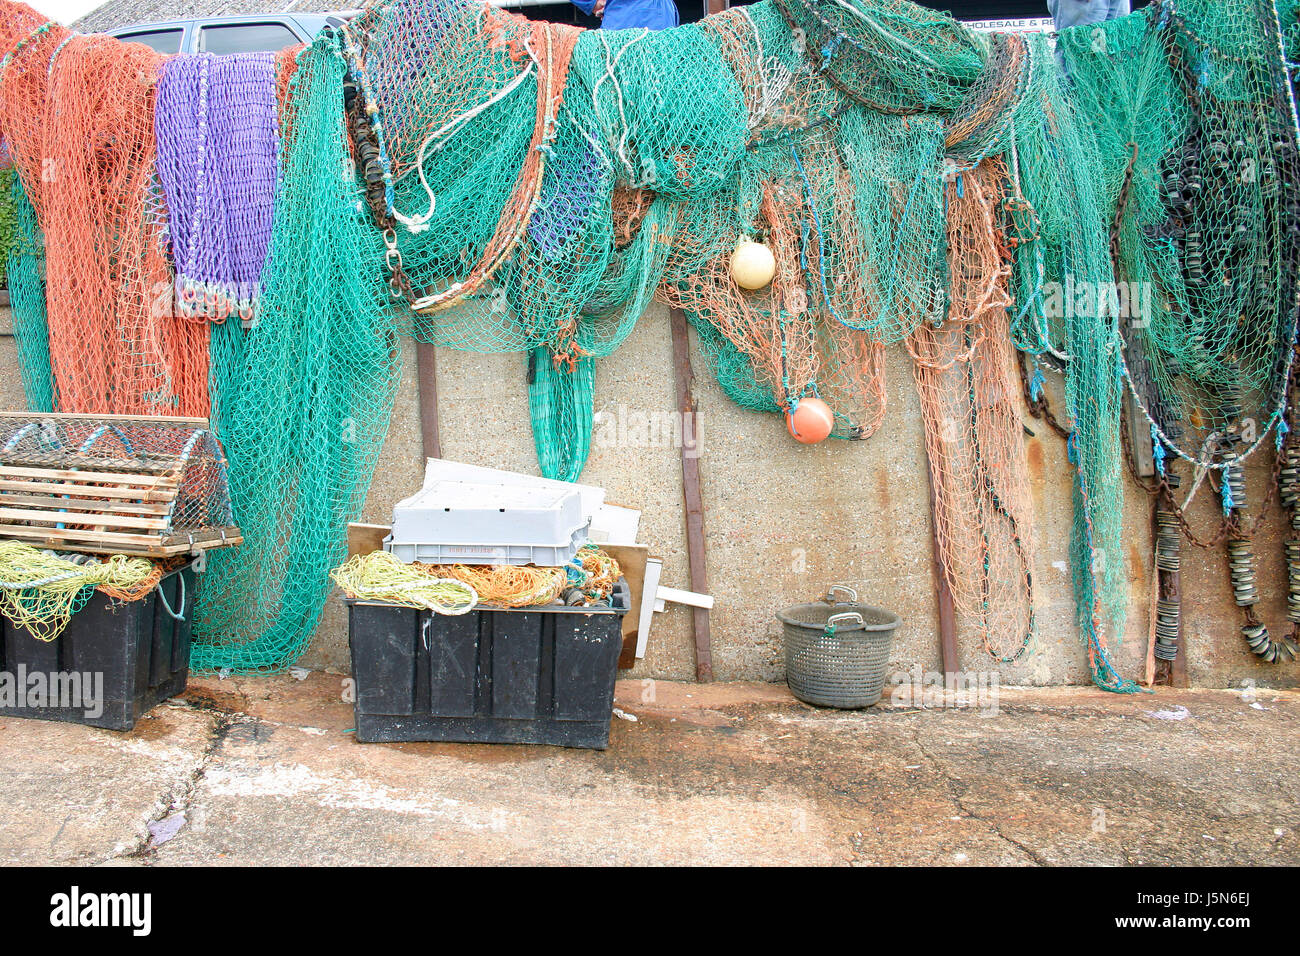 Colored or coloured fishing nets hanging in the sun to dry. Stock Photo